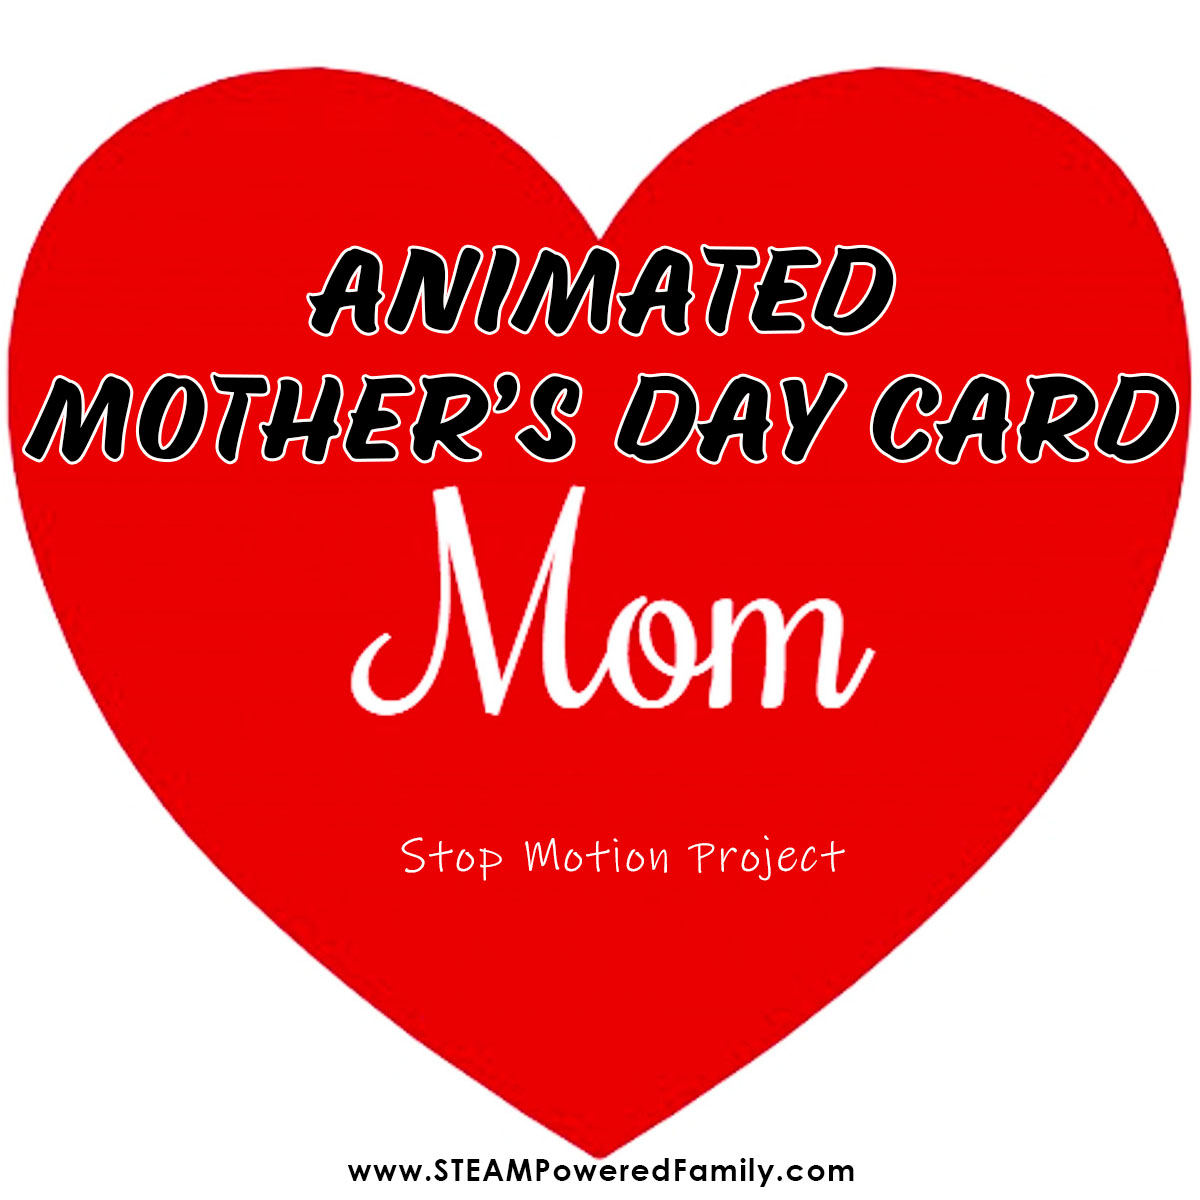 Mother’s Day Card – Stop Motion Project